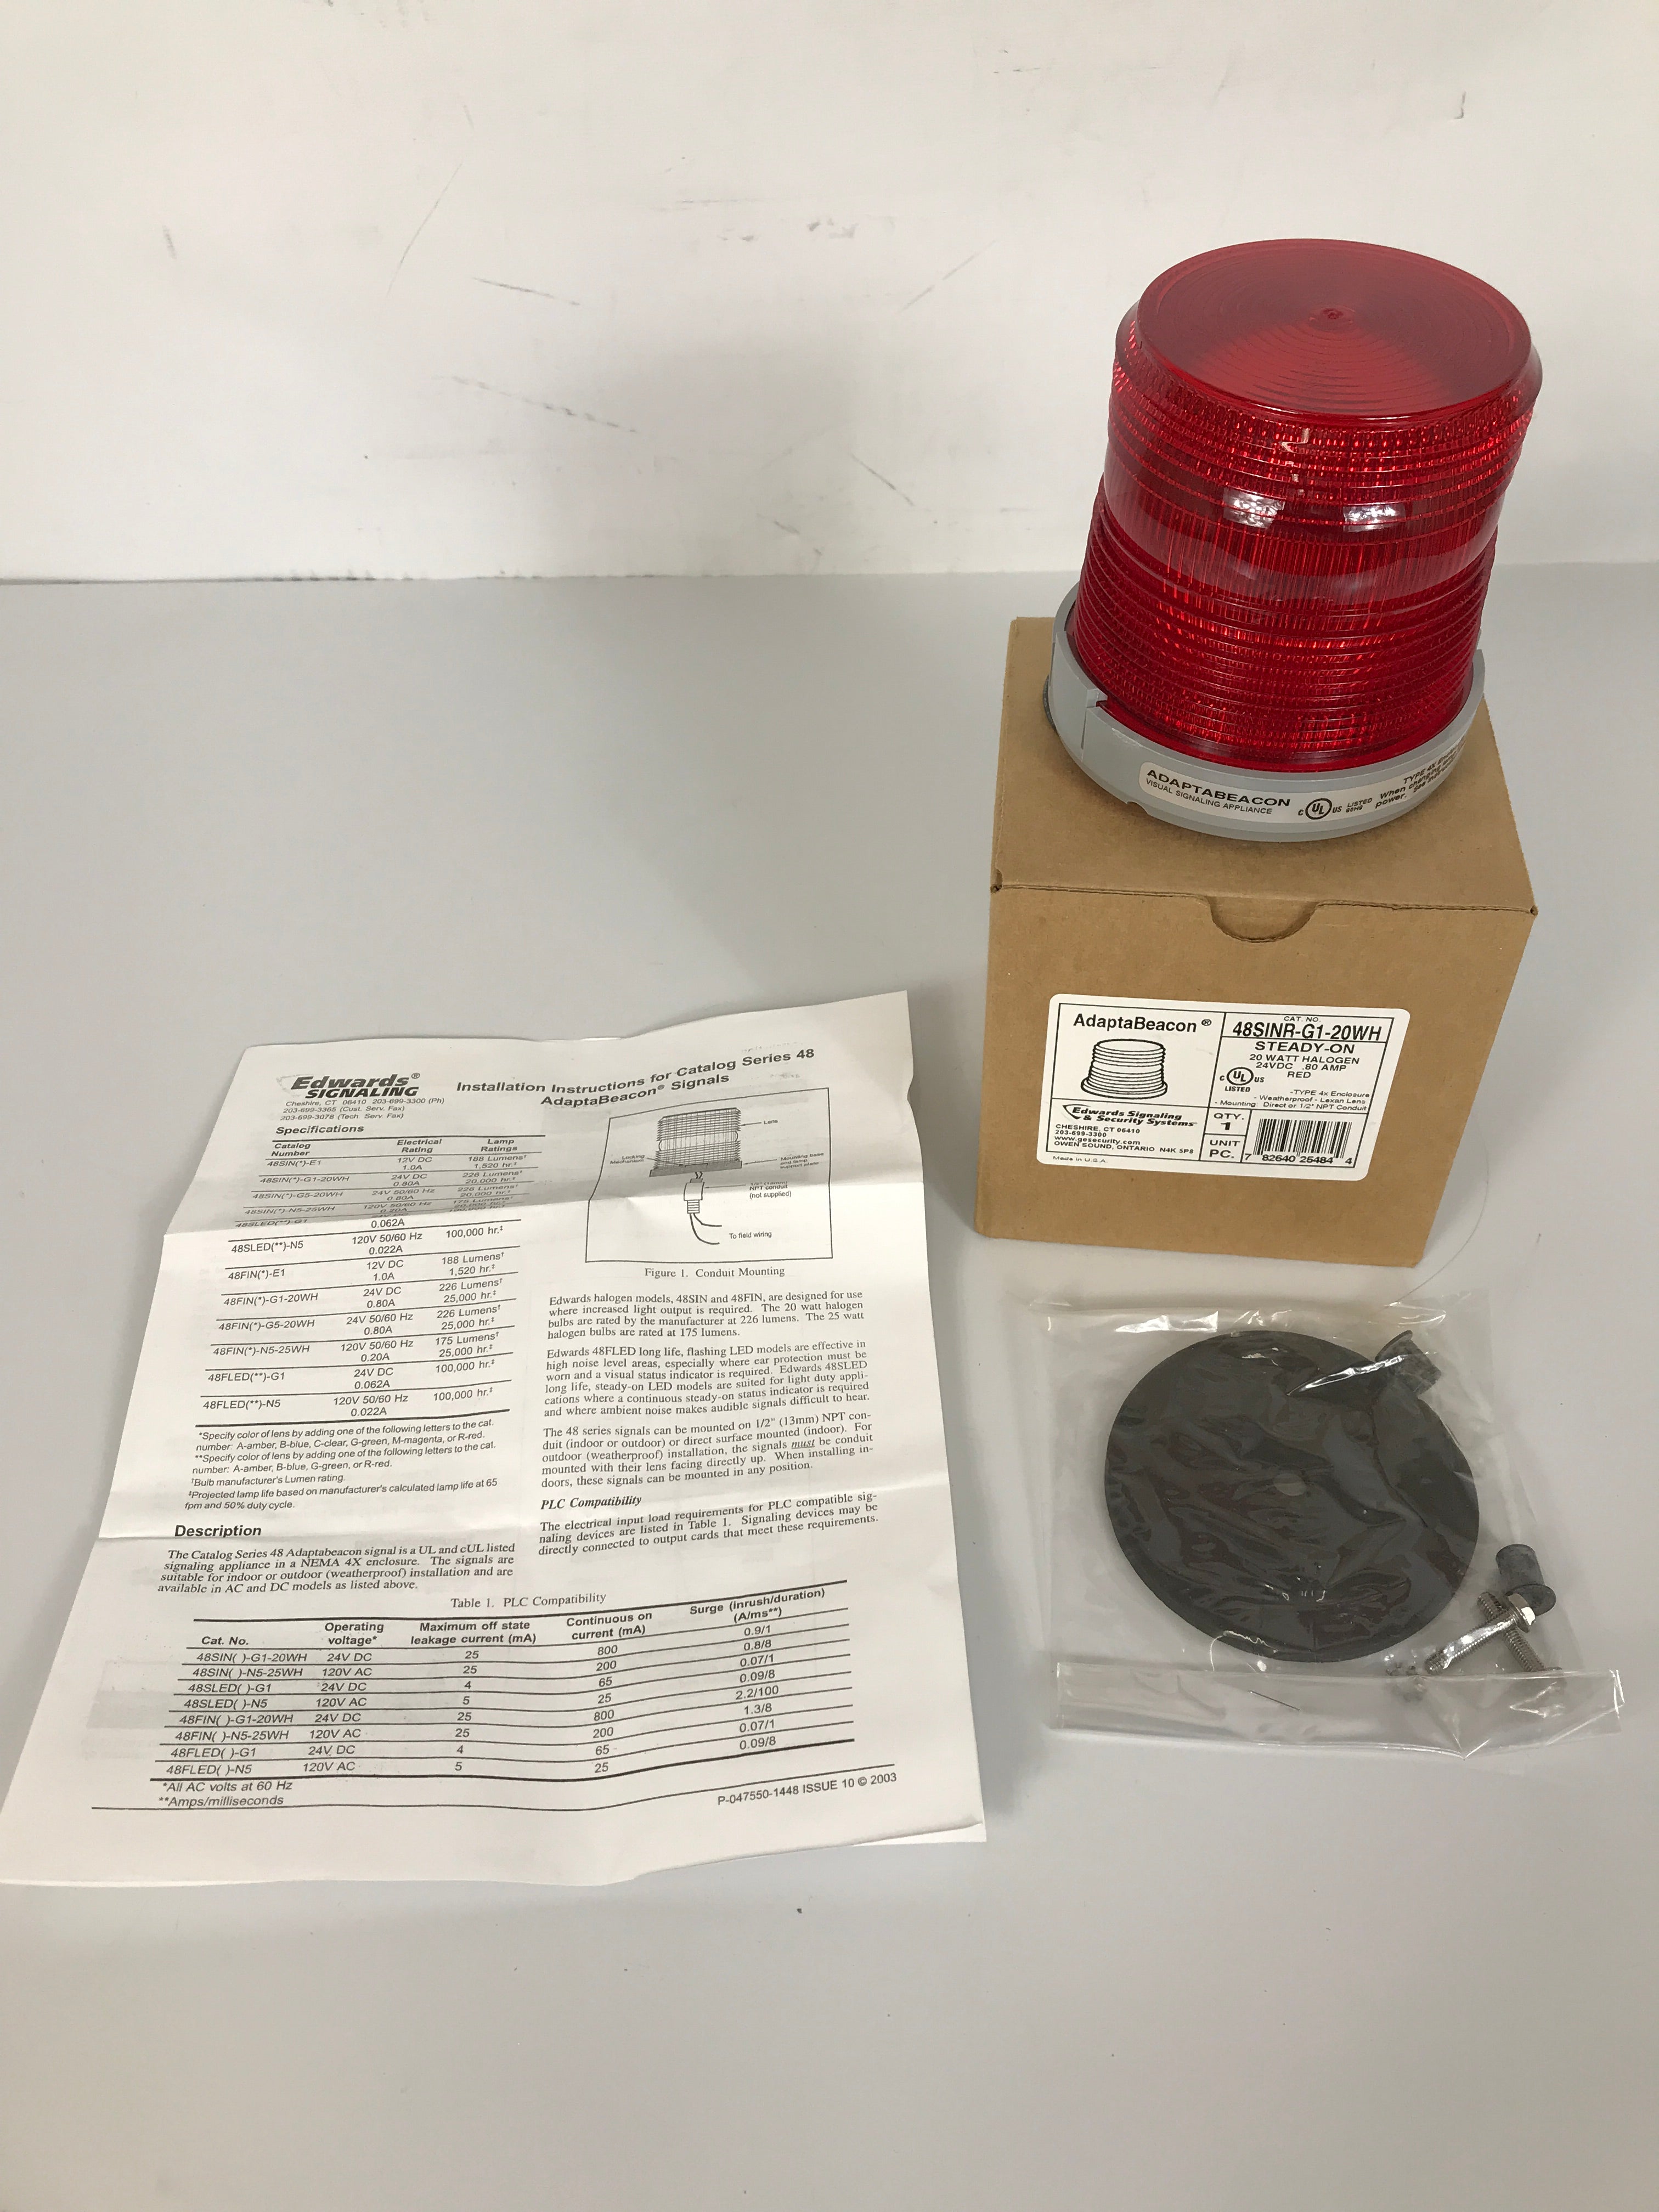 AdaptaBeacon 48SINR-G1-20WH Steady-On Automotive Light *New in Box*